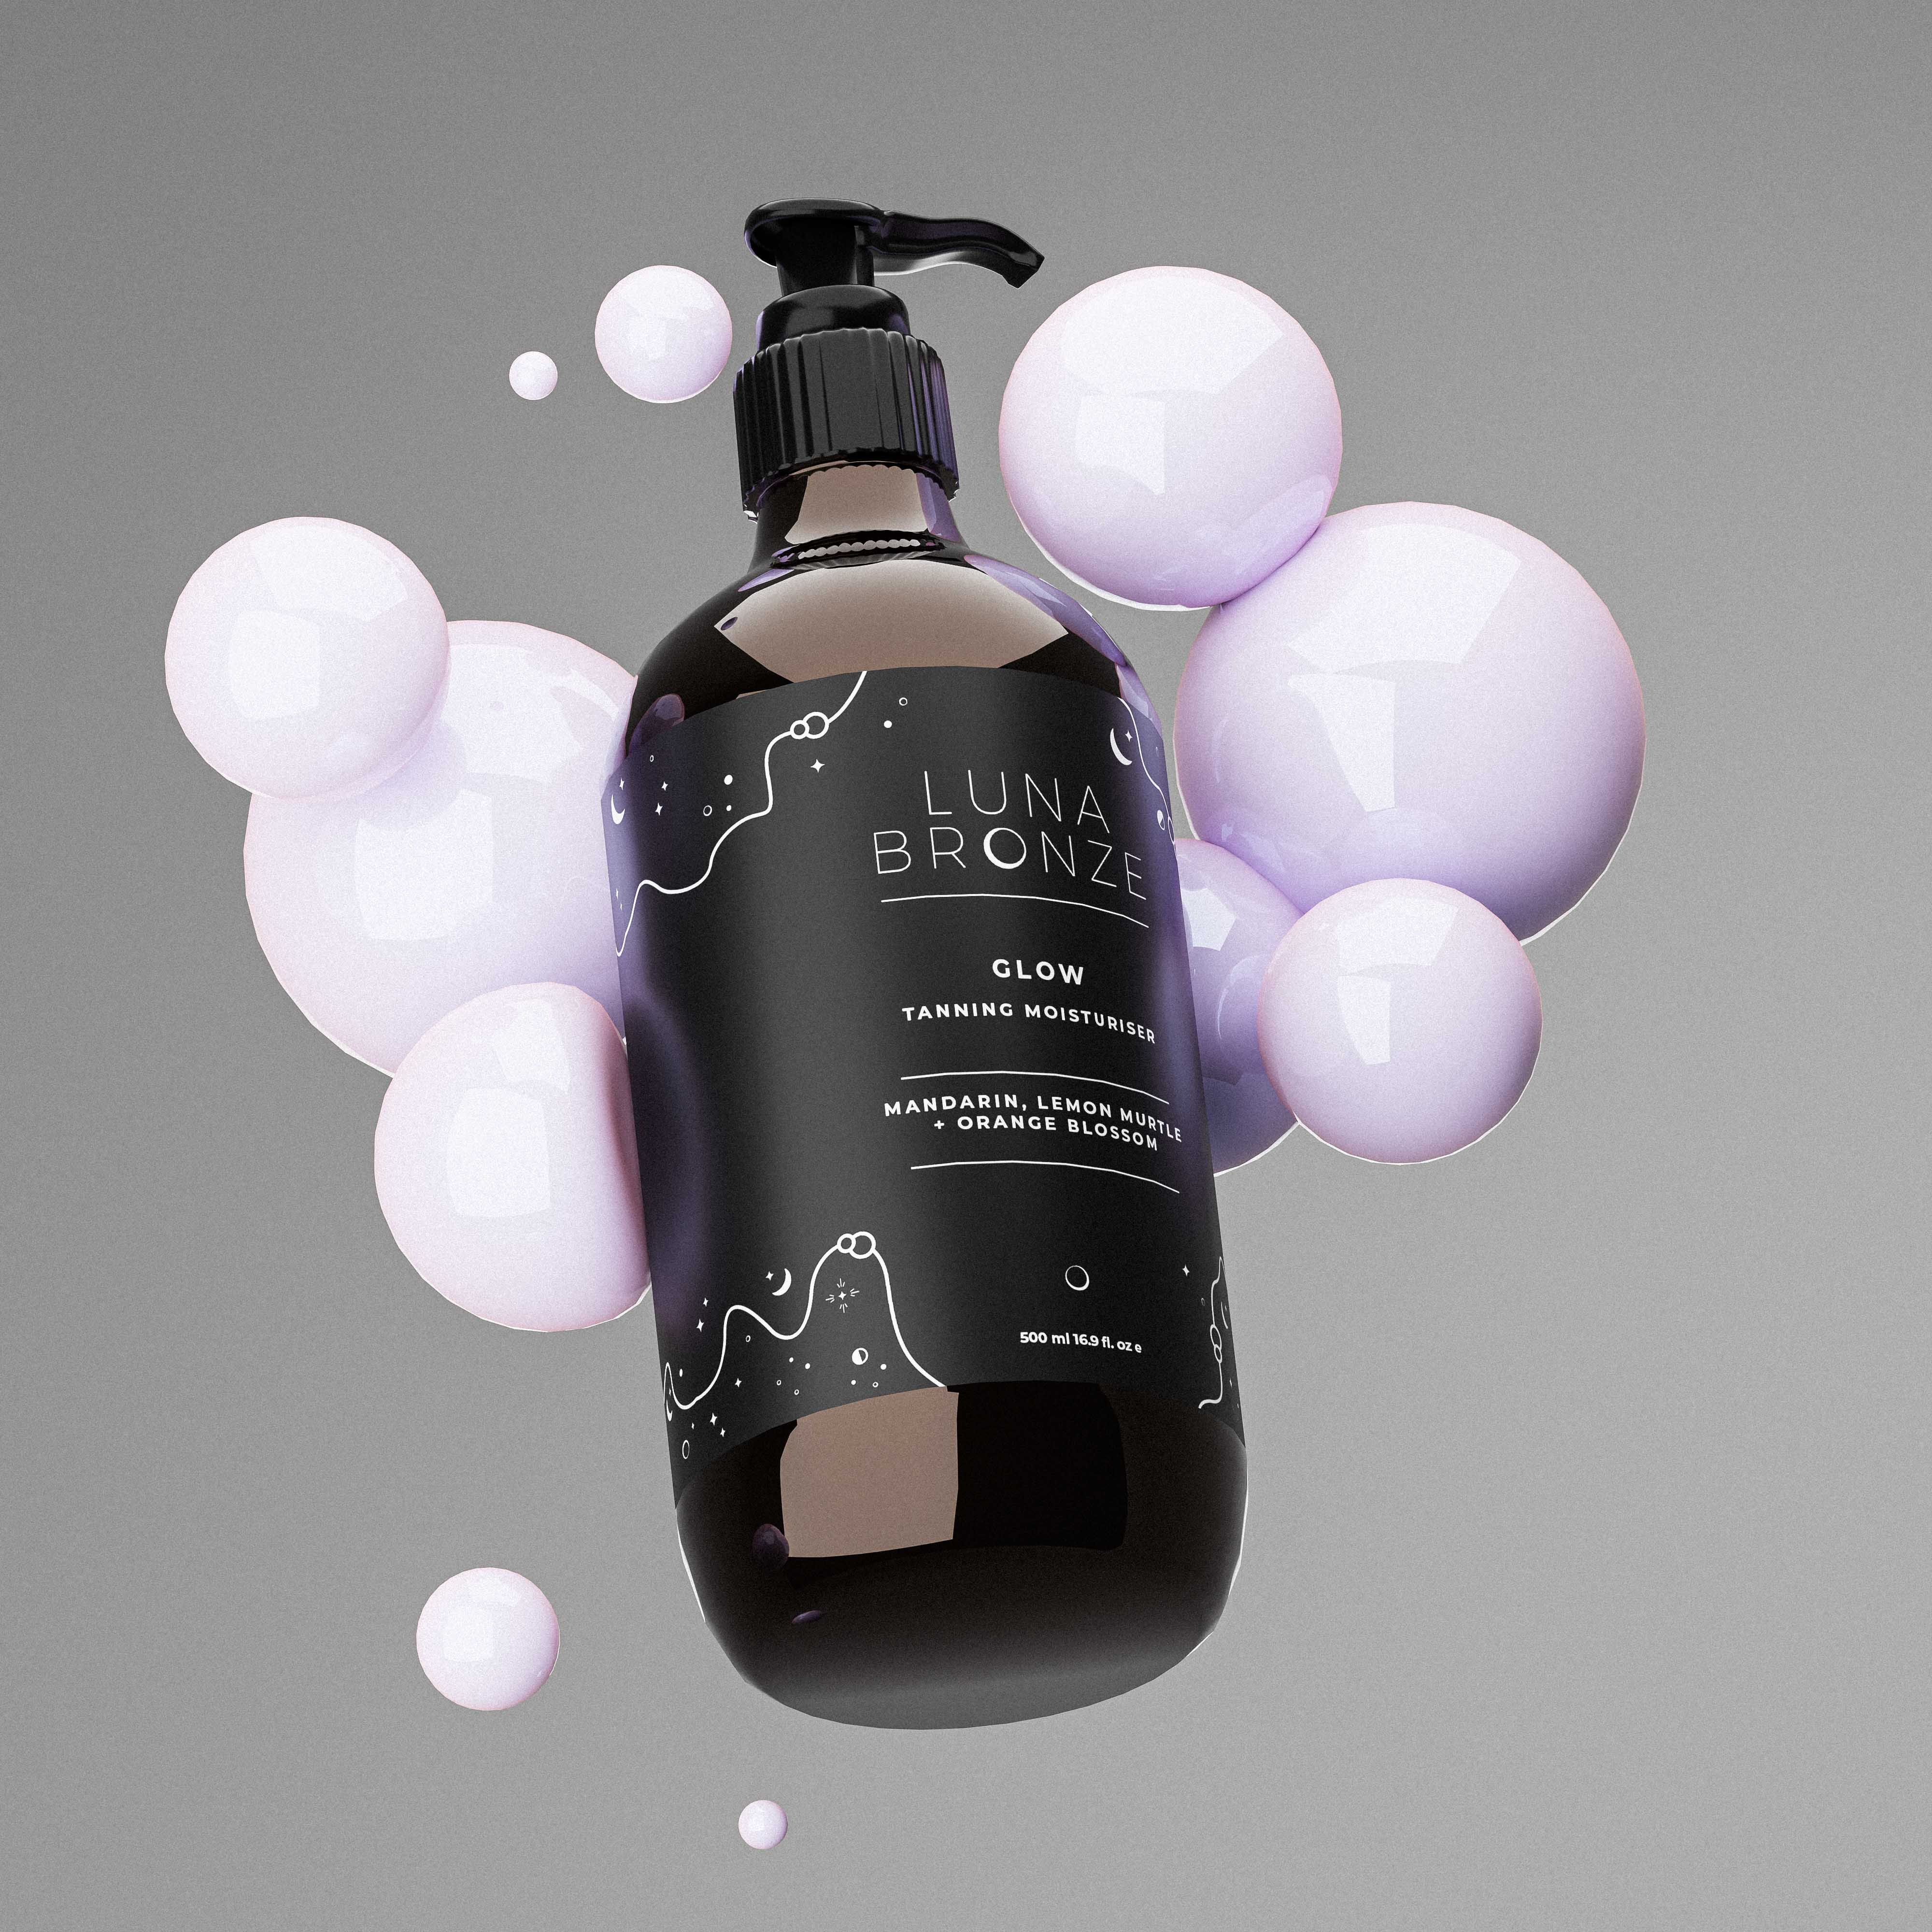 A cosmetic pump bottle floating surrounded by light purple orbs.